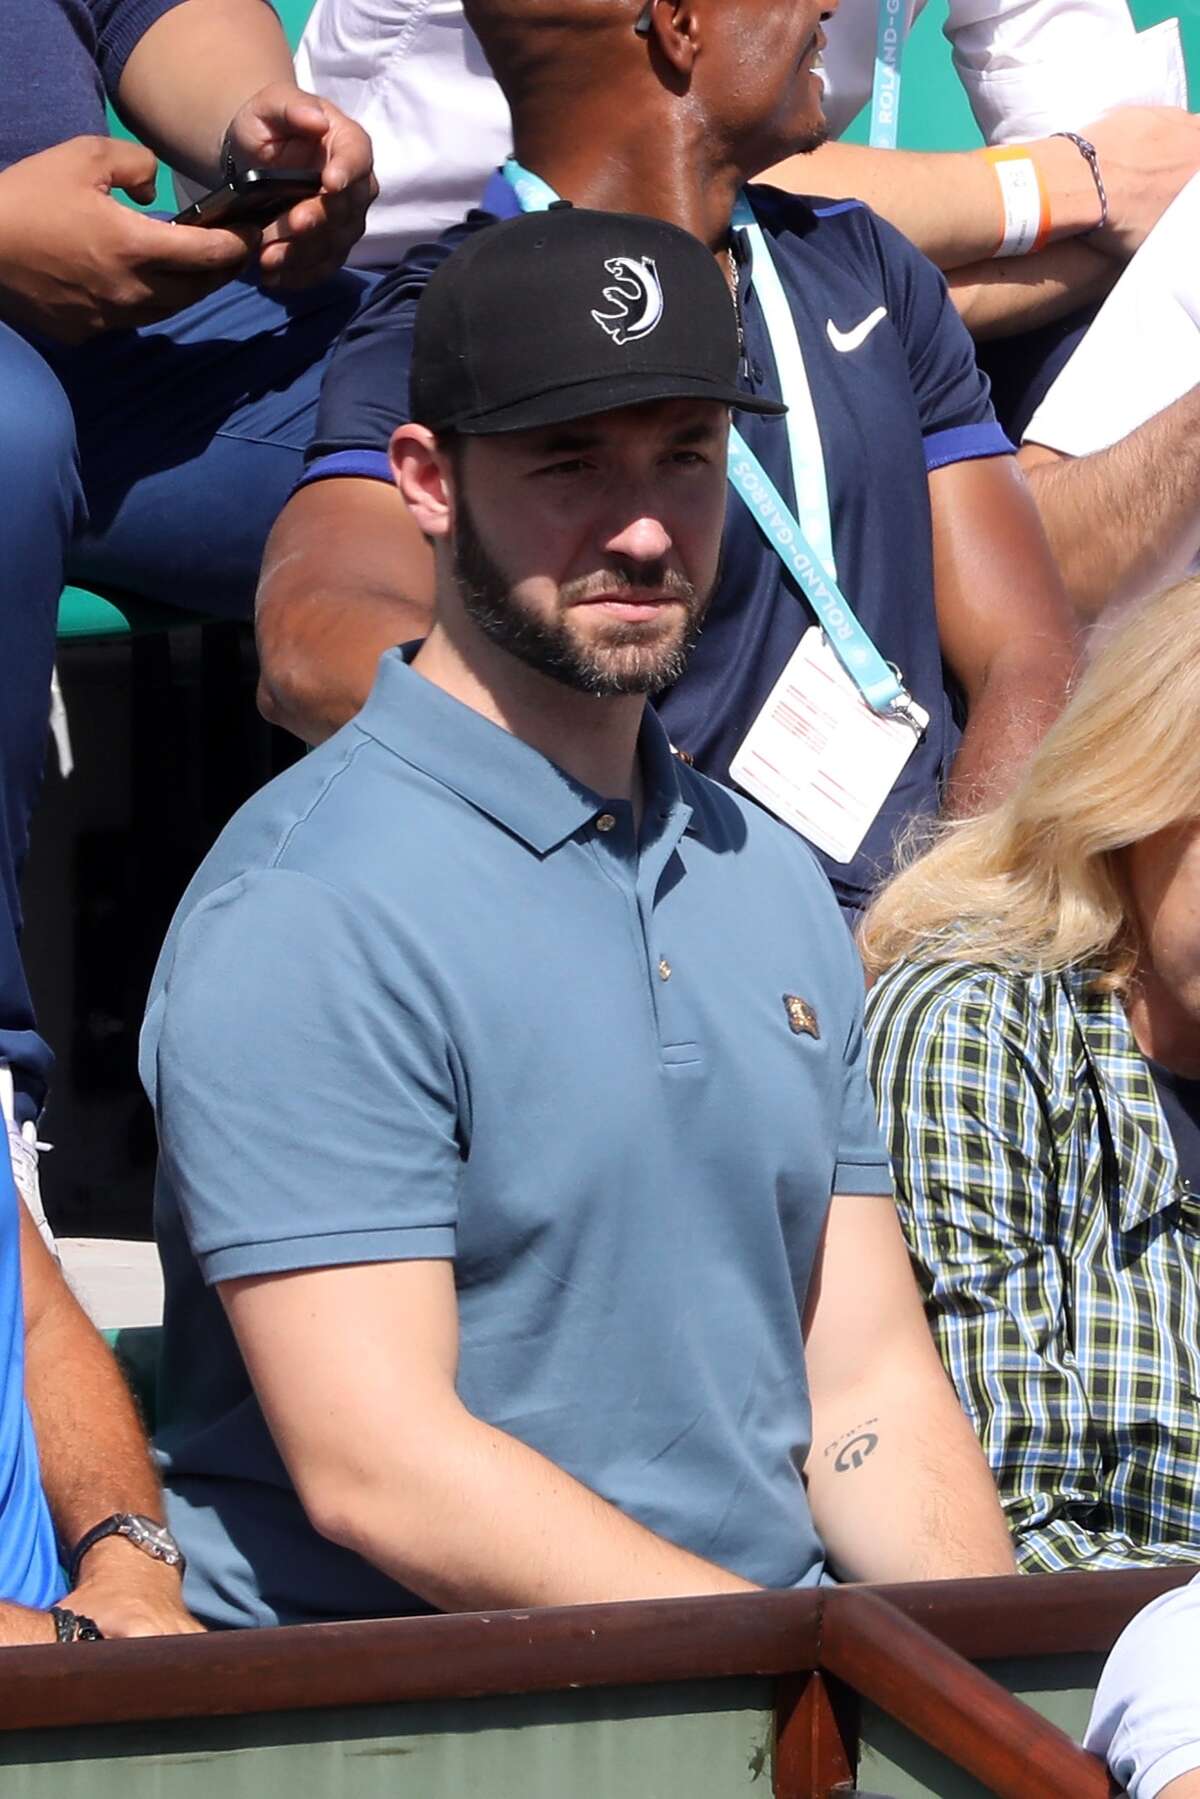 Serena Williams husband Alexis Ohanian, co-founder of Reddit, is seen supporting his wife during the 2018 French Open - Day Three at Roland Garros on May 29, 2018 in Paris, France.